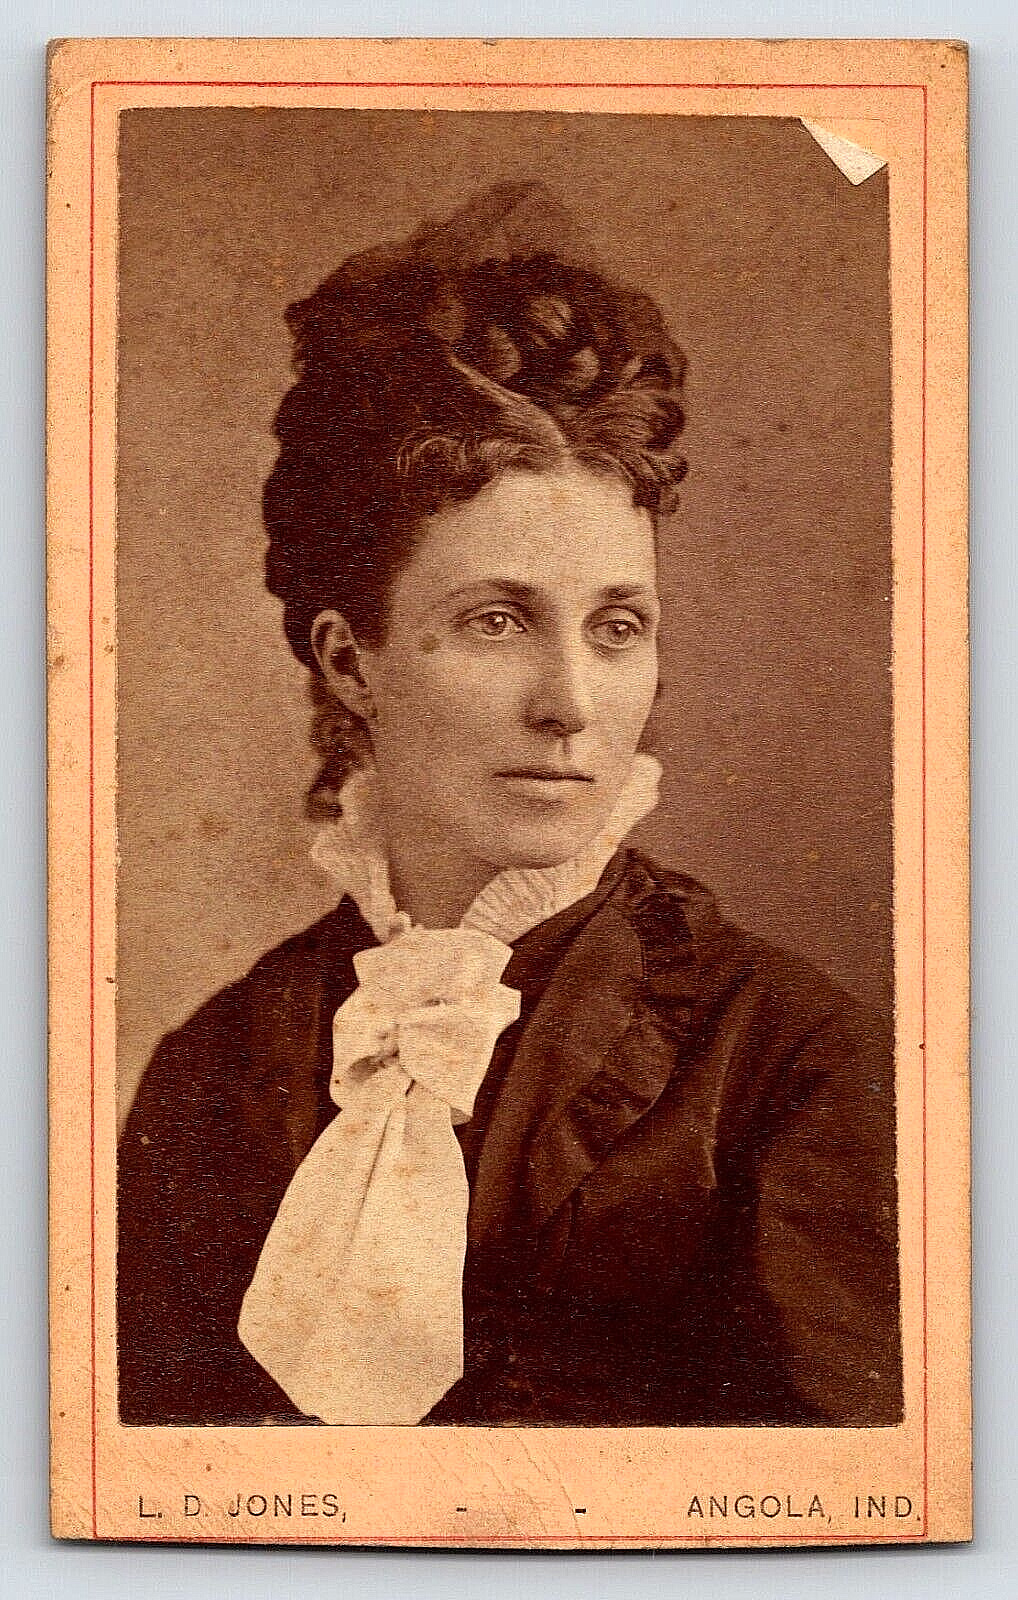 Original Old Vintage Antique Real Photo CDV Beautiful Lady Dress Angola, IN 1874